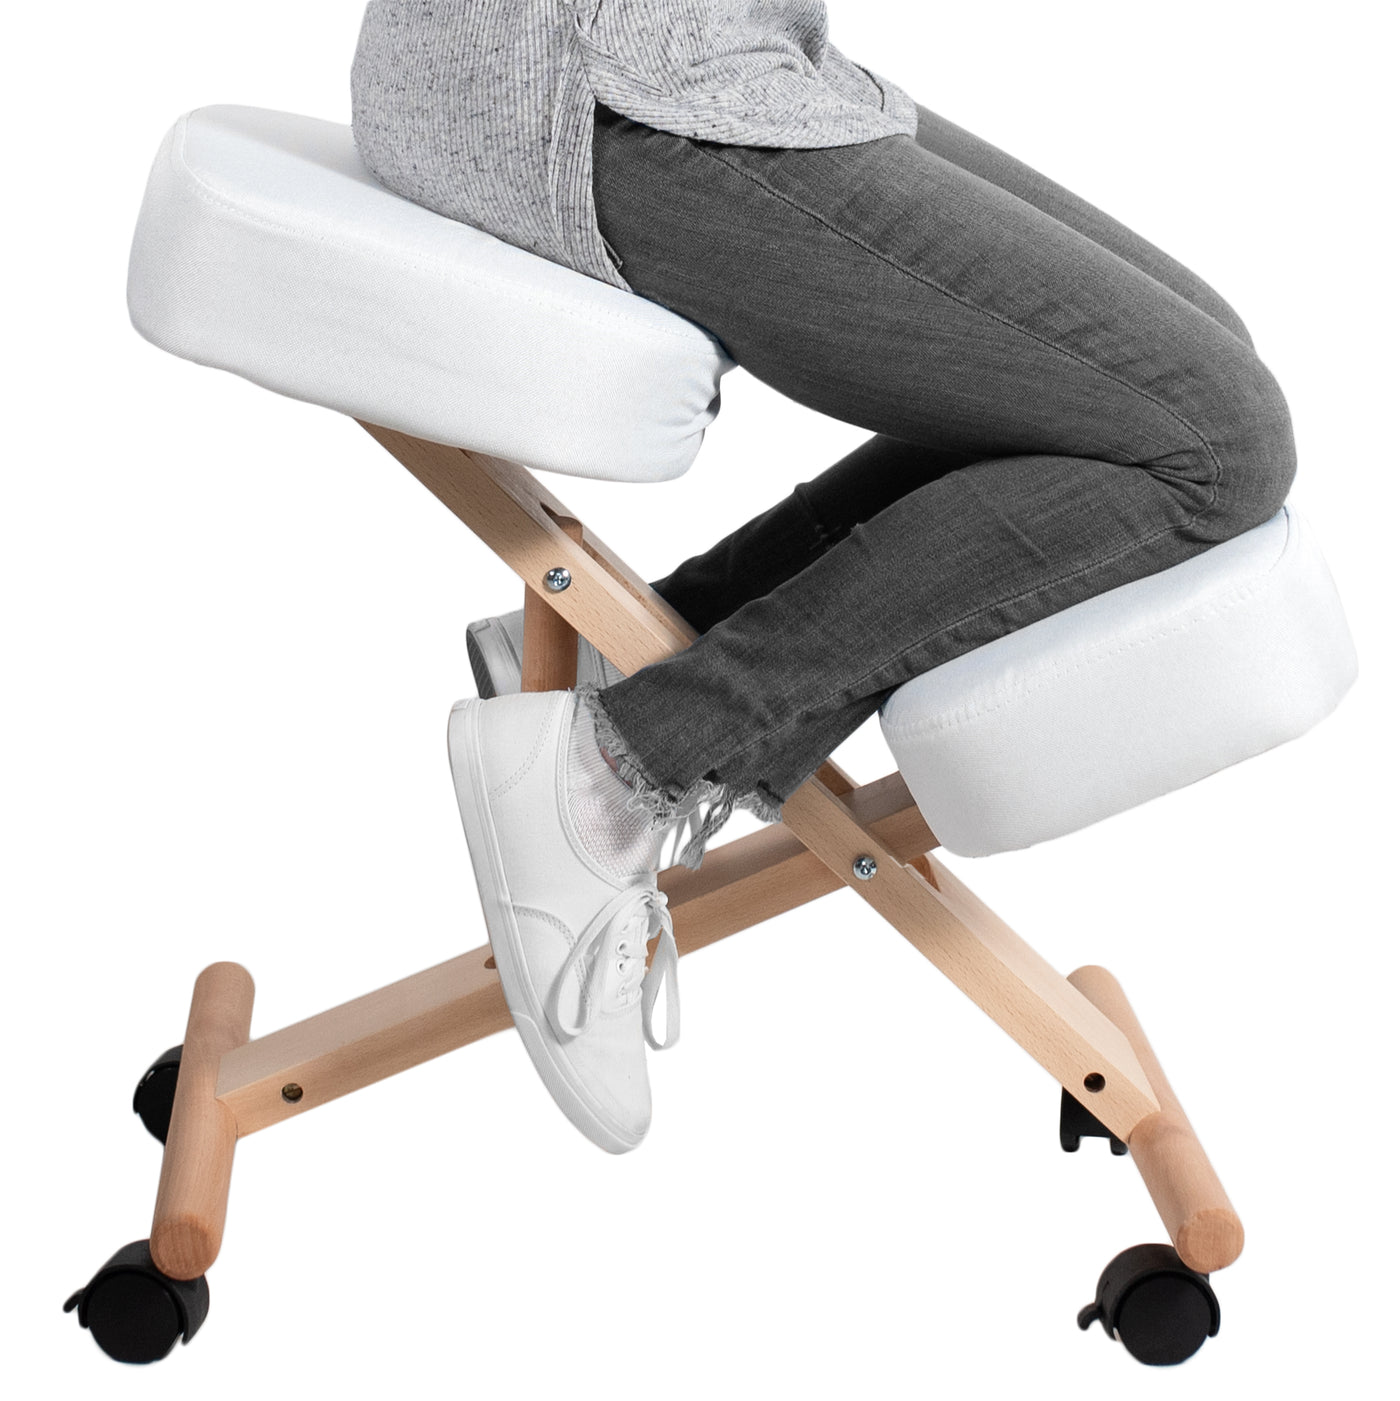 Comfortable Kneeling Chair with Wheels